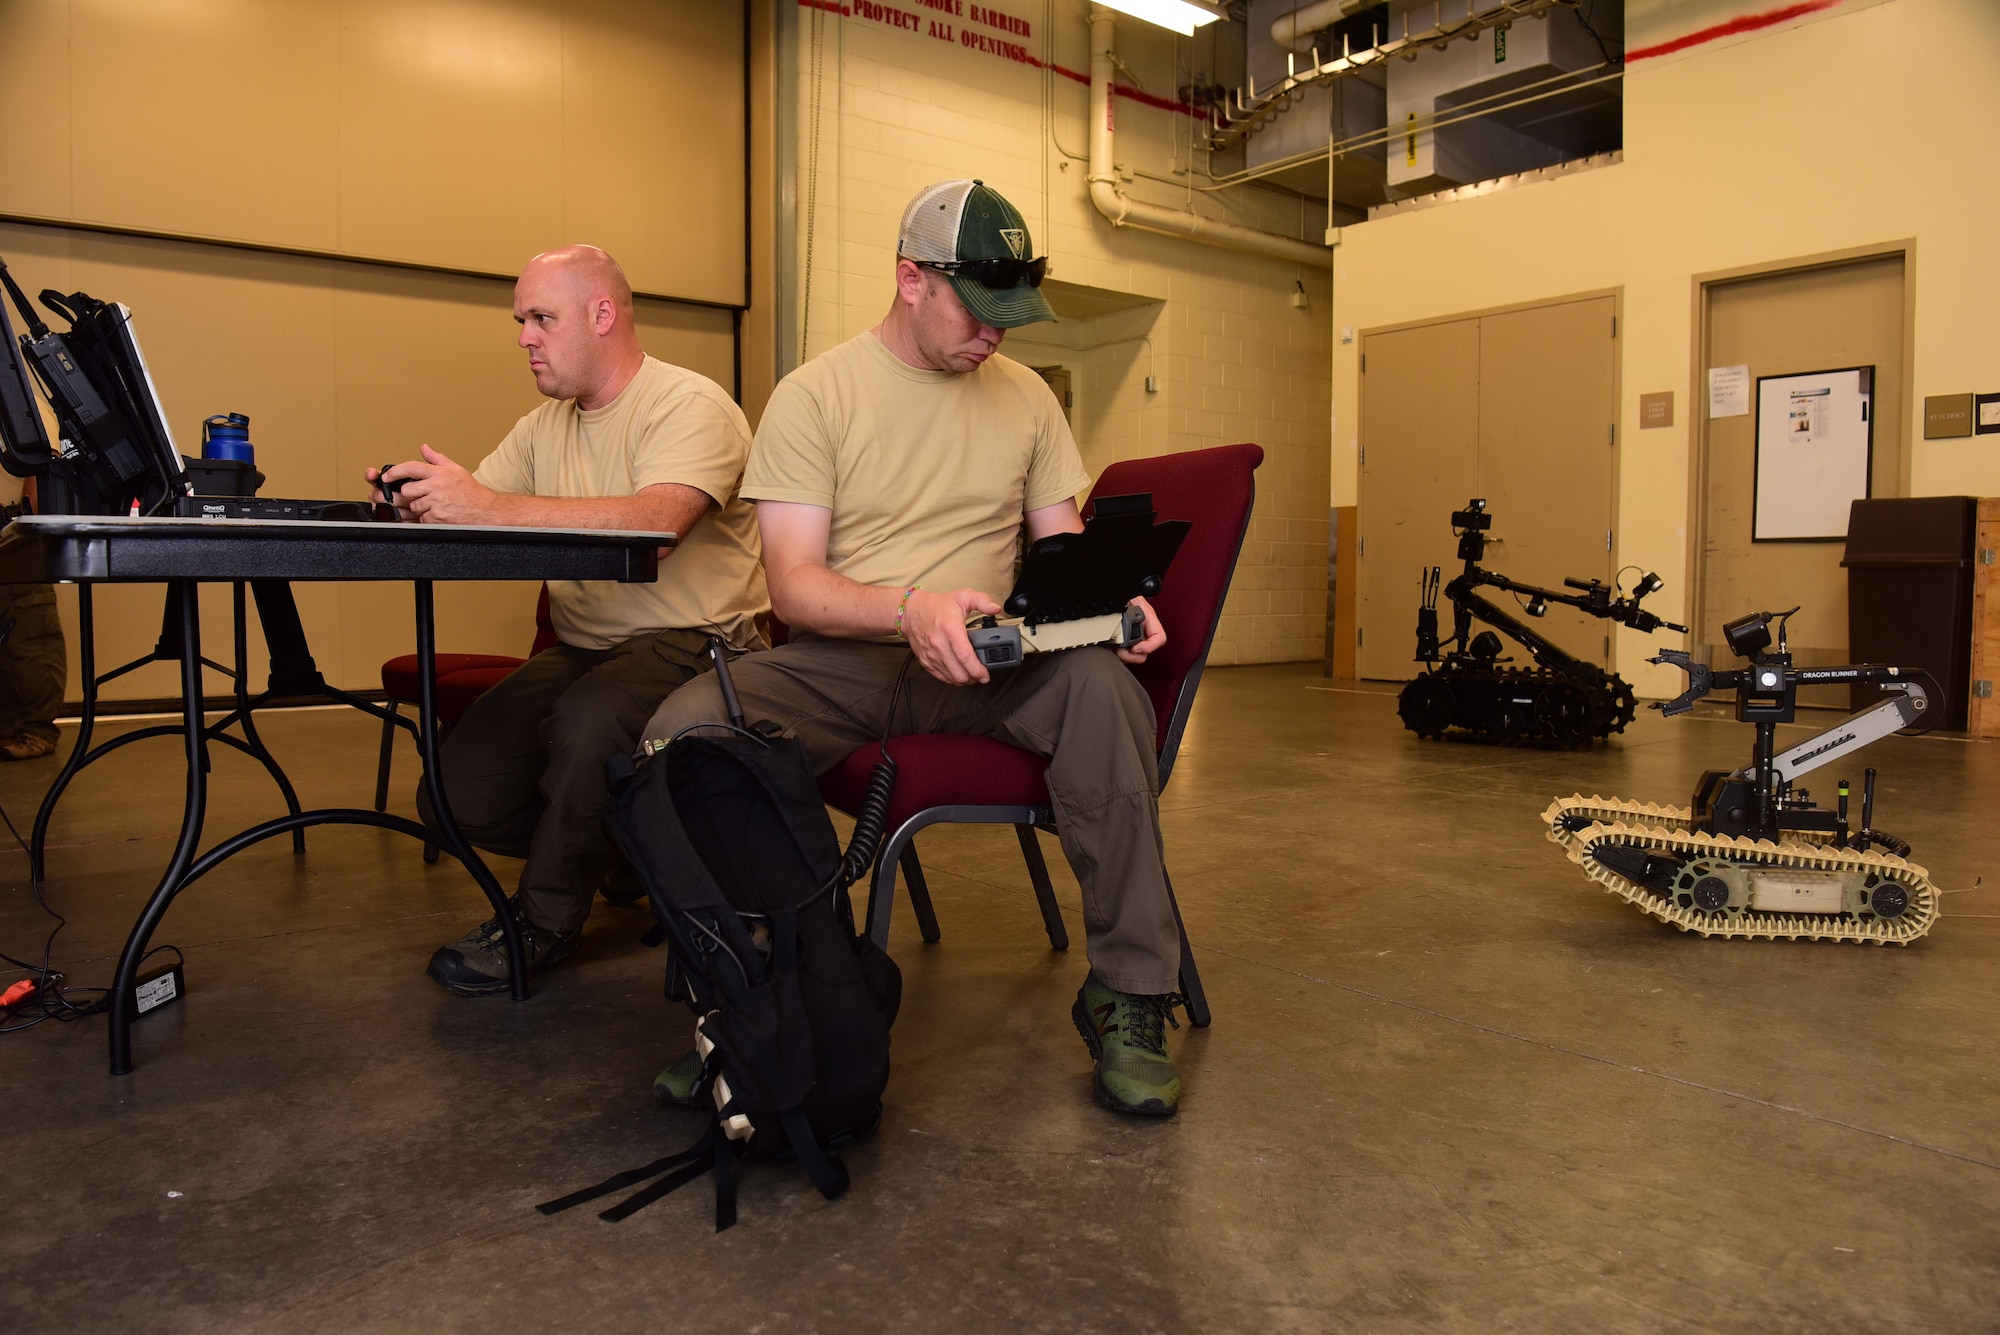 Mike Ward, left, New Jersey State Police Bomb Unit detective, and Joe Byra, NJSP detective, operate ordnance disposal robots during the 2018 Eastern National Robotics Rodeo at the at the Charleston convention center in Charleston S.C. Aug. 13, 2018, in Charleston, S.C.